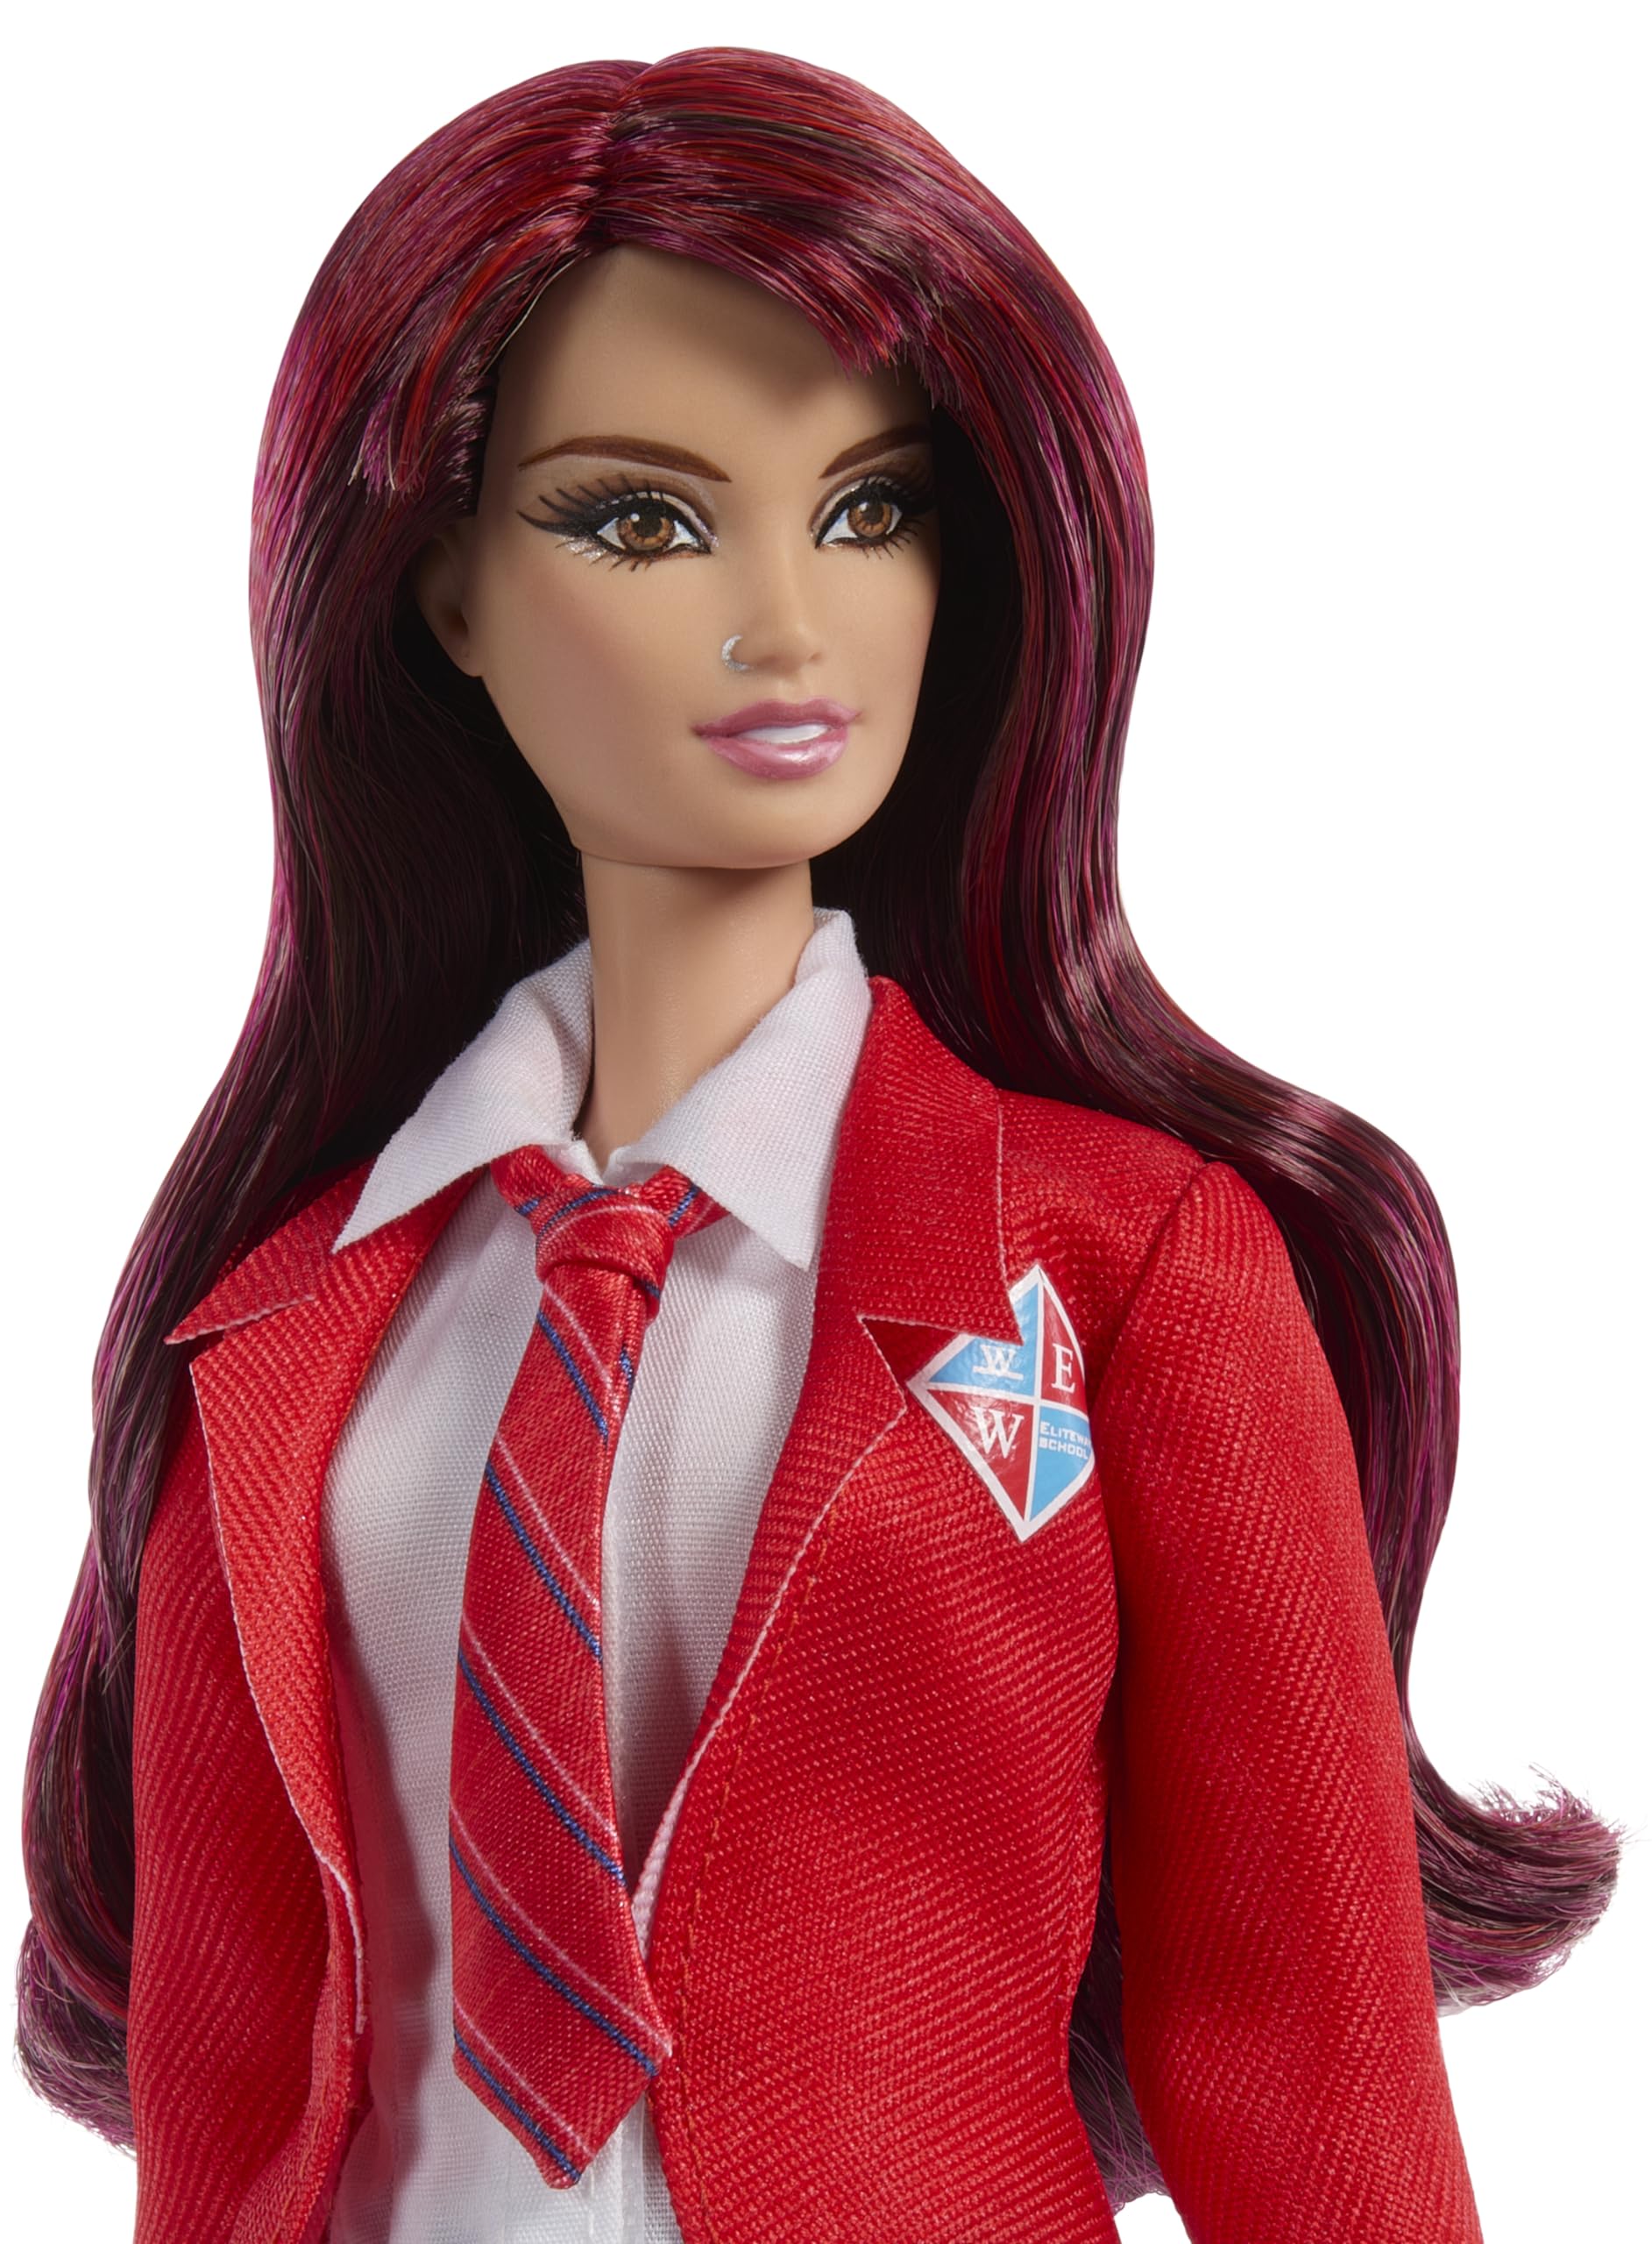 Barbie Roberta Doll Wearing Removable School Uniform with Boots, Necktie & Long Red Hair, Inspired by Rebelde & RBD